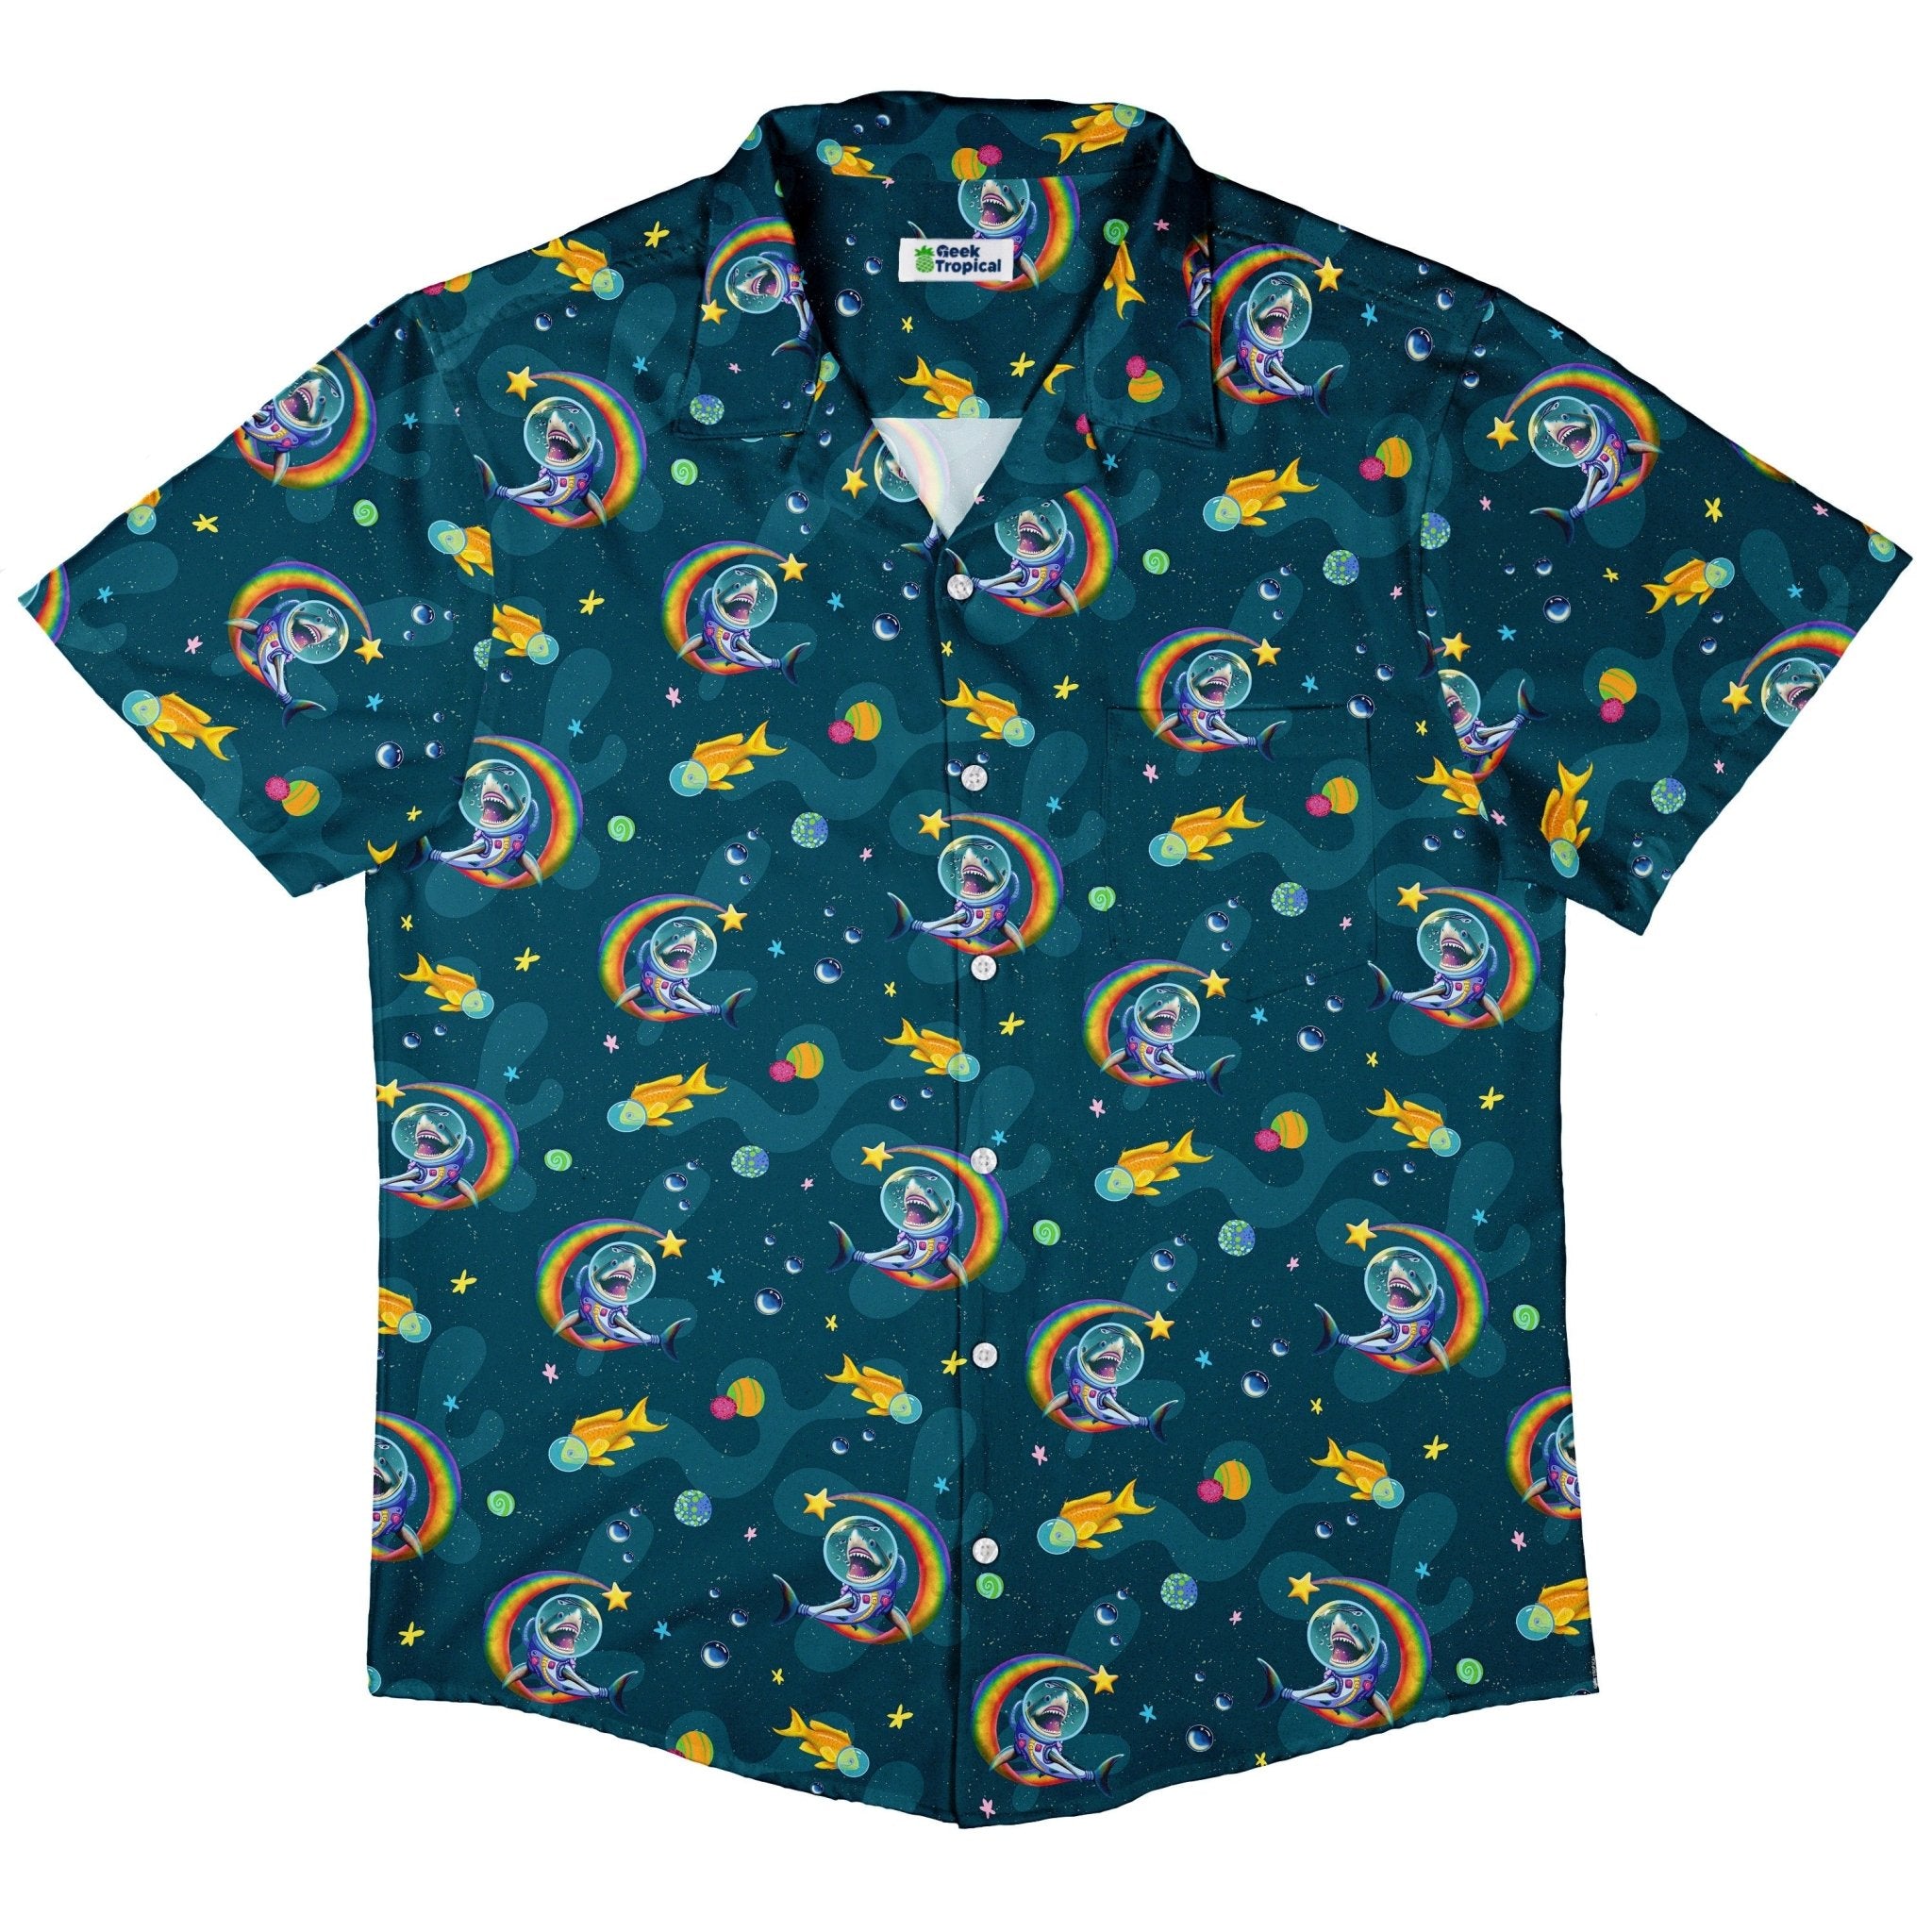 Space Sharks Button Up Shirt - adult sizing - Animal Patterns - Design by Carla Morrow